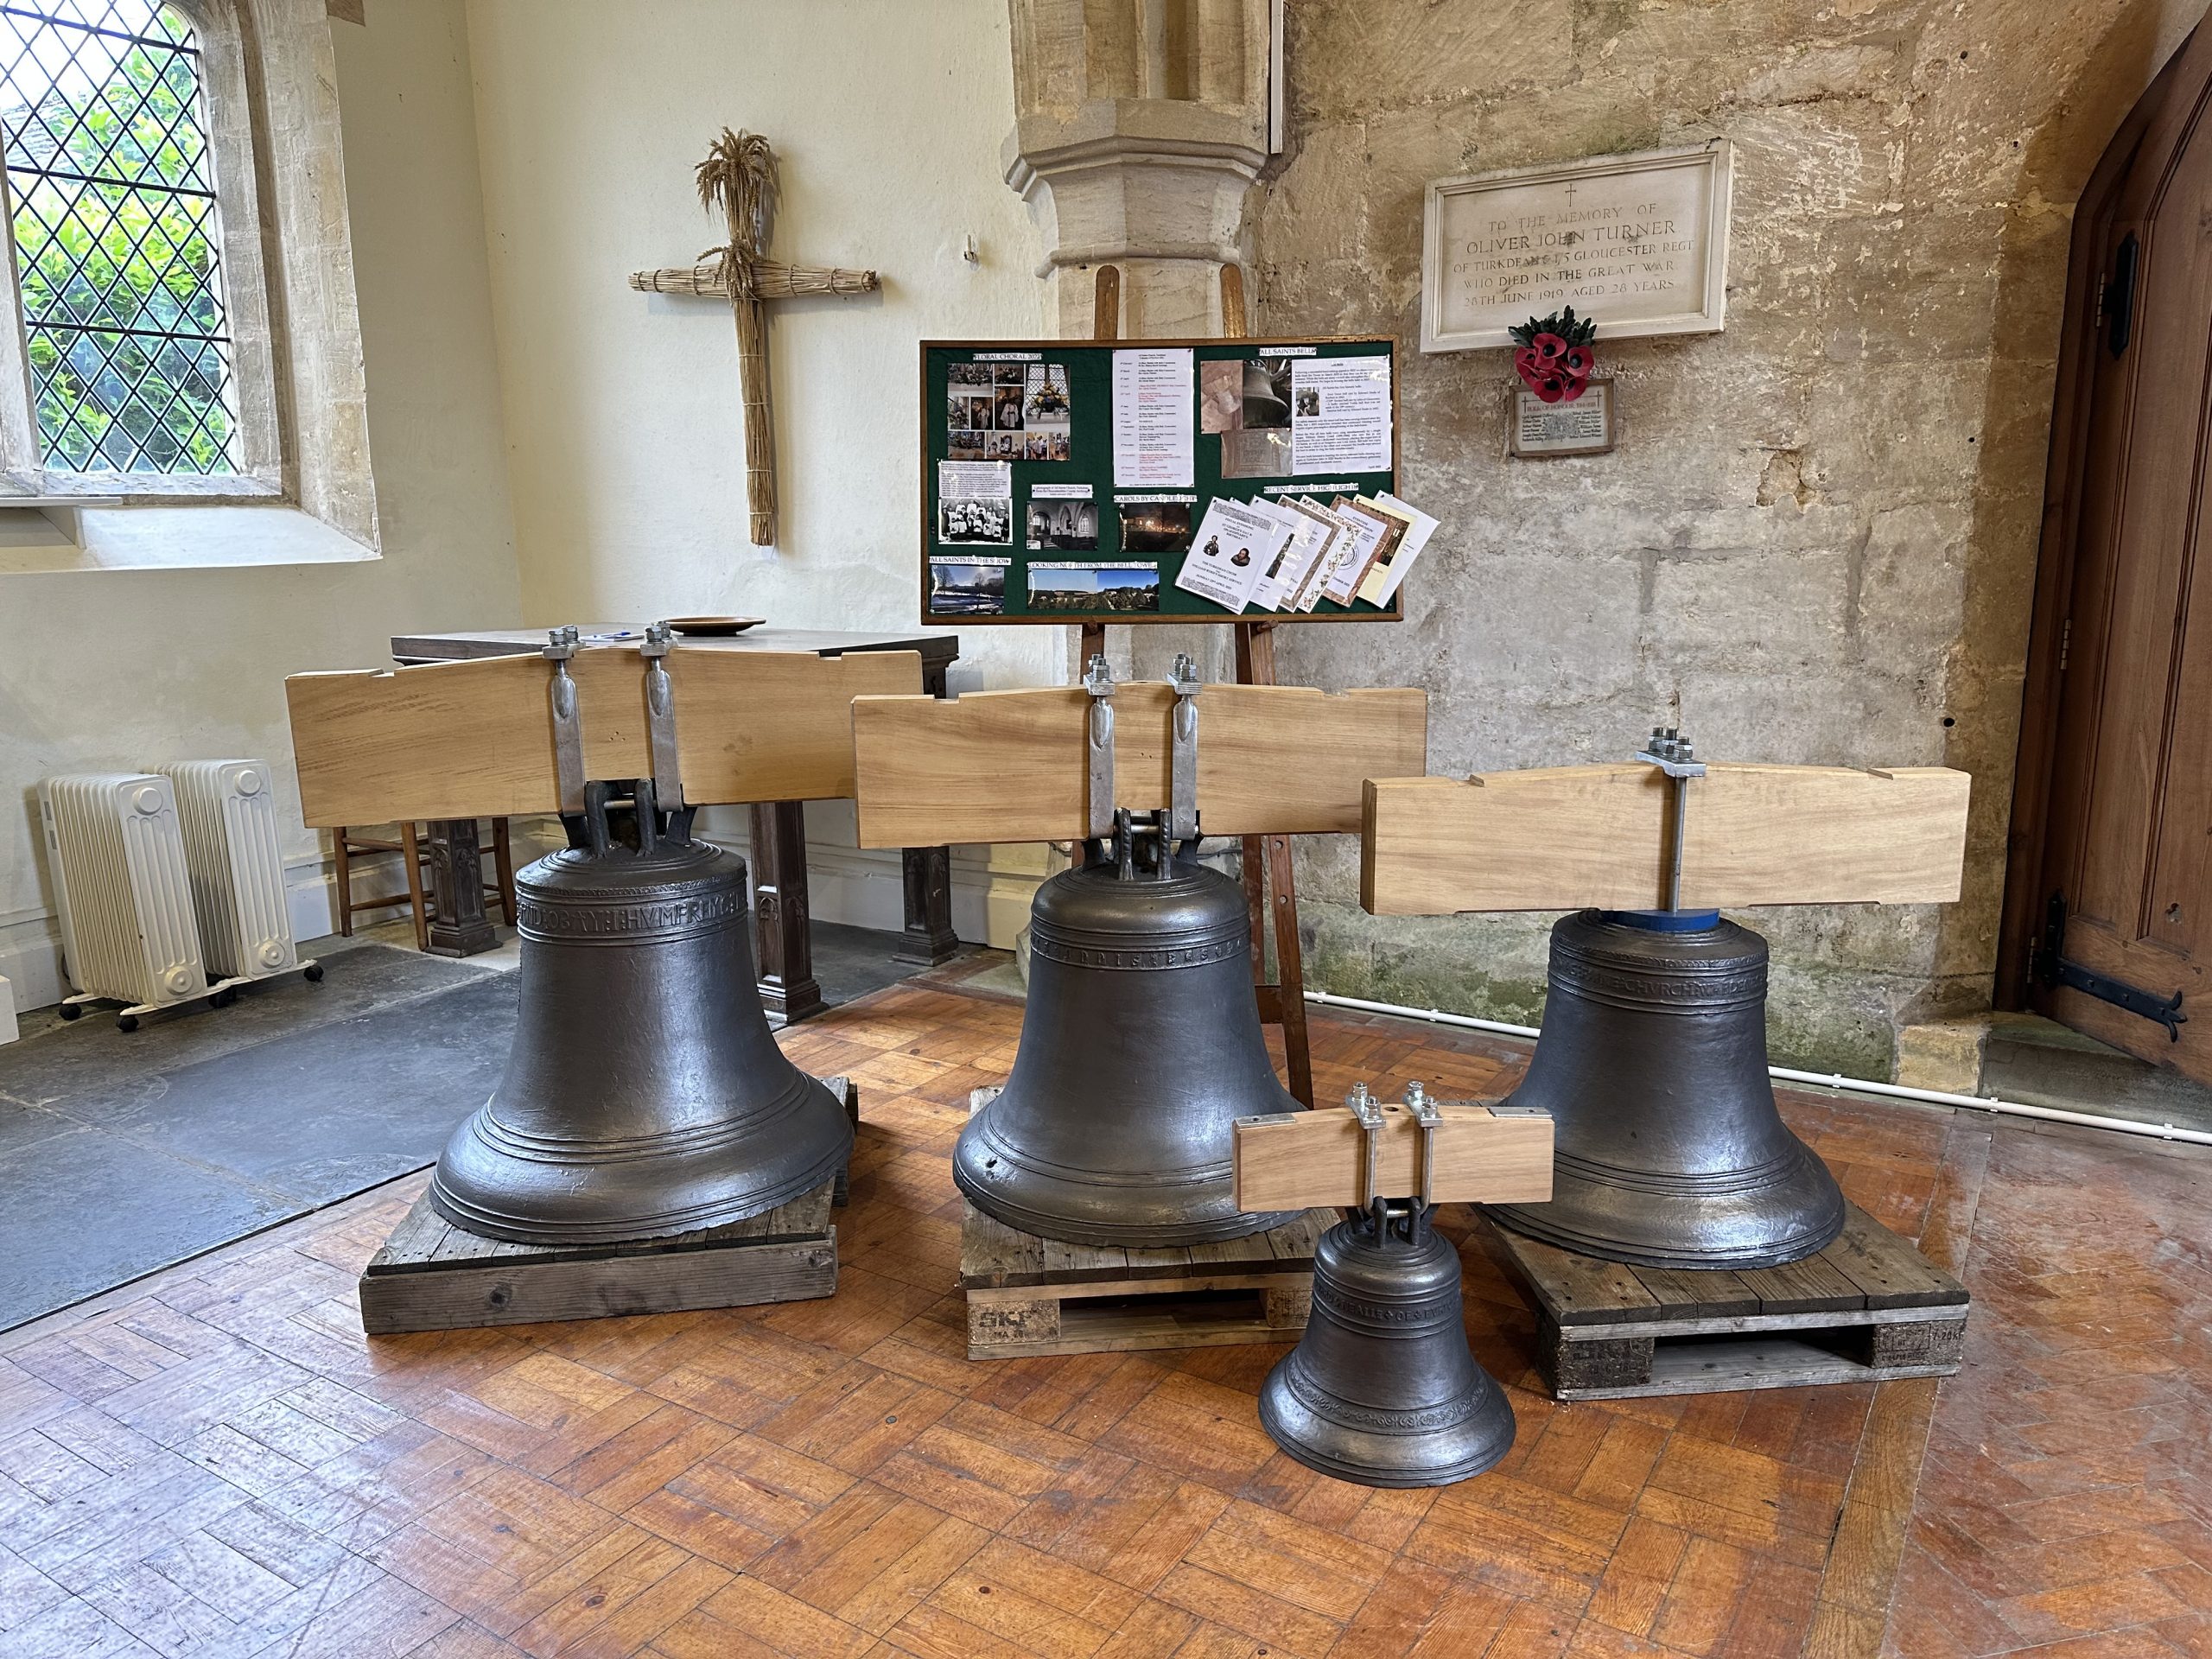 The restored bells of All Saints Church, Turkdean ready to be rehung from the newly strengthened bell frame